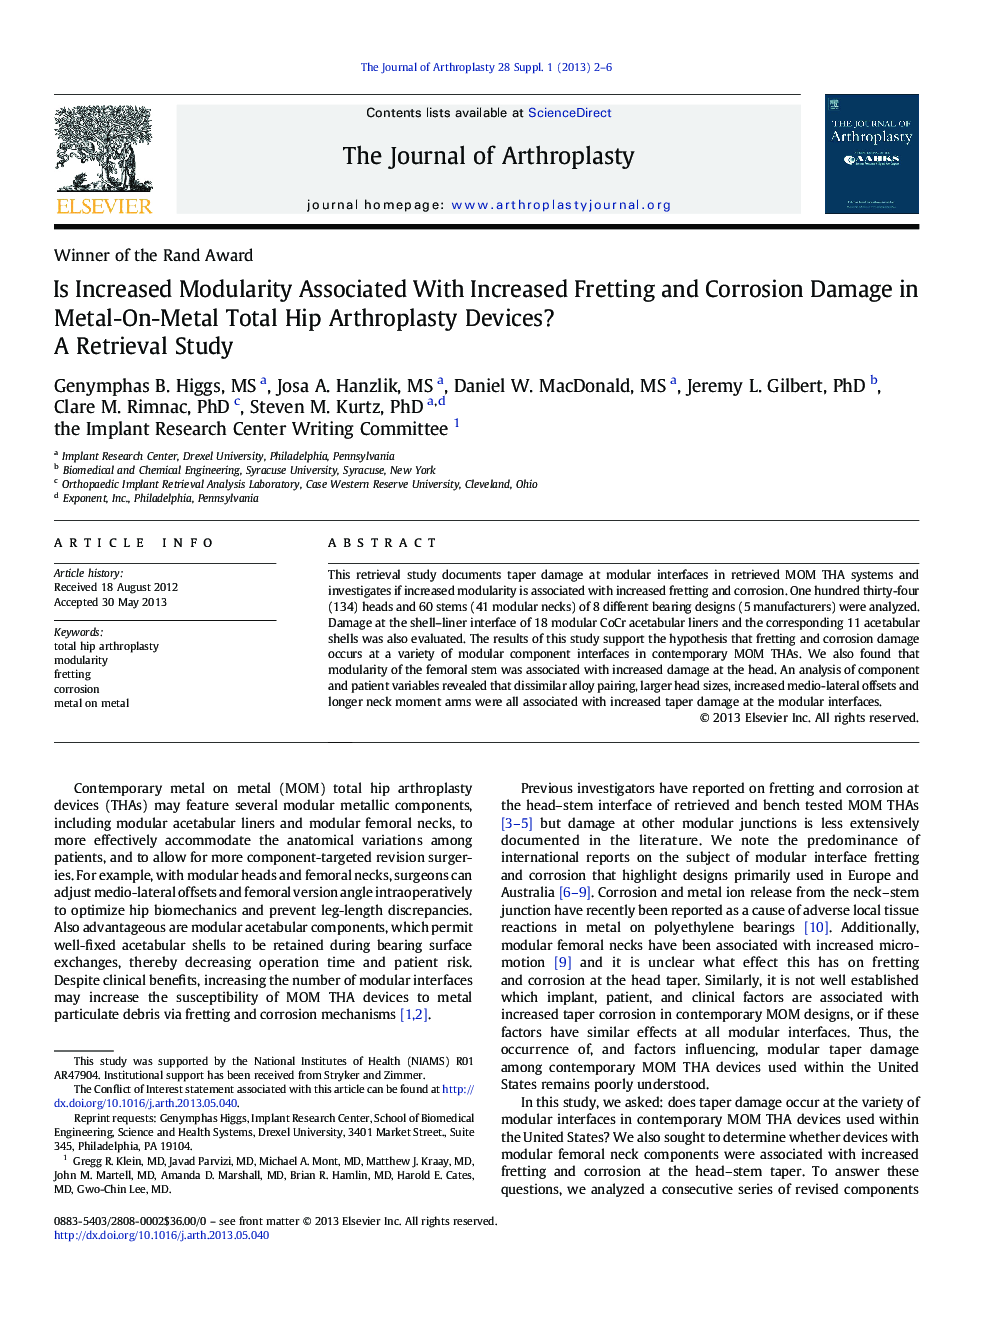 Is Increased Modularity Associated With Increased Fretting and Corrosion Damage in Metal-On-Metal Total Hip Arthroplasty Devices? : A Retrieval Study